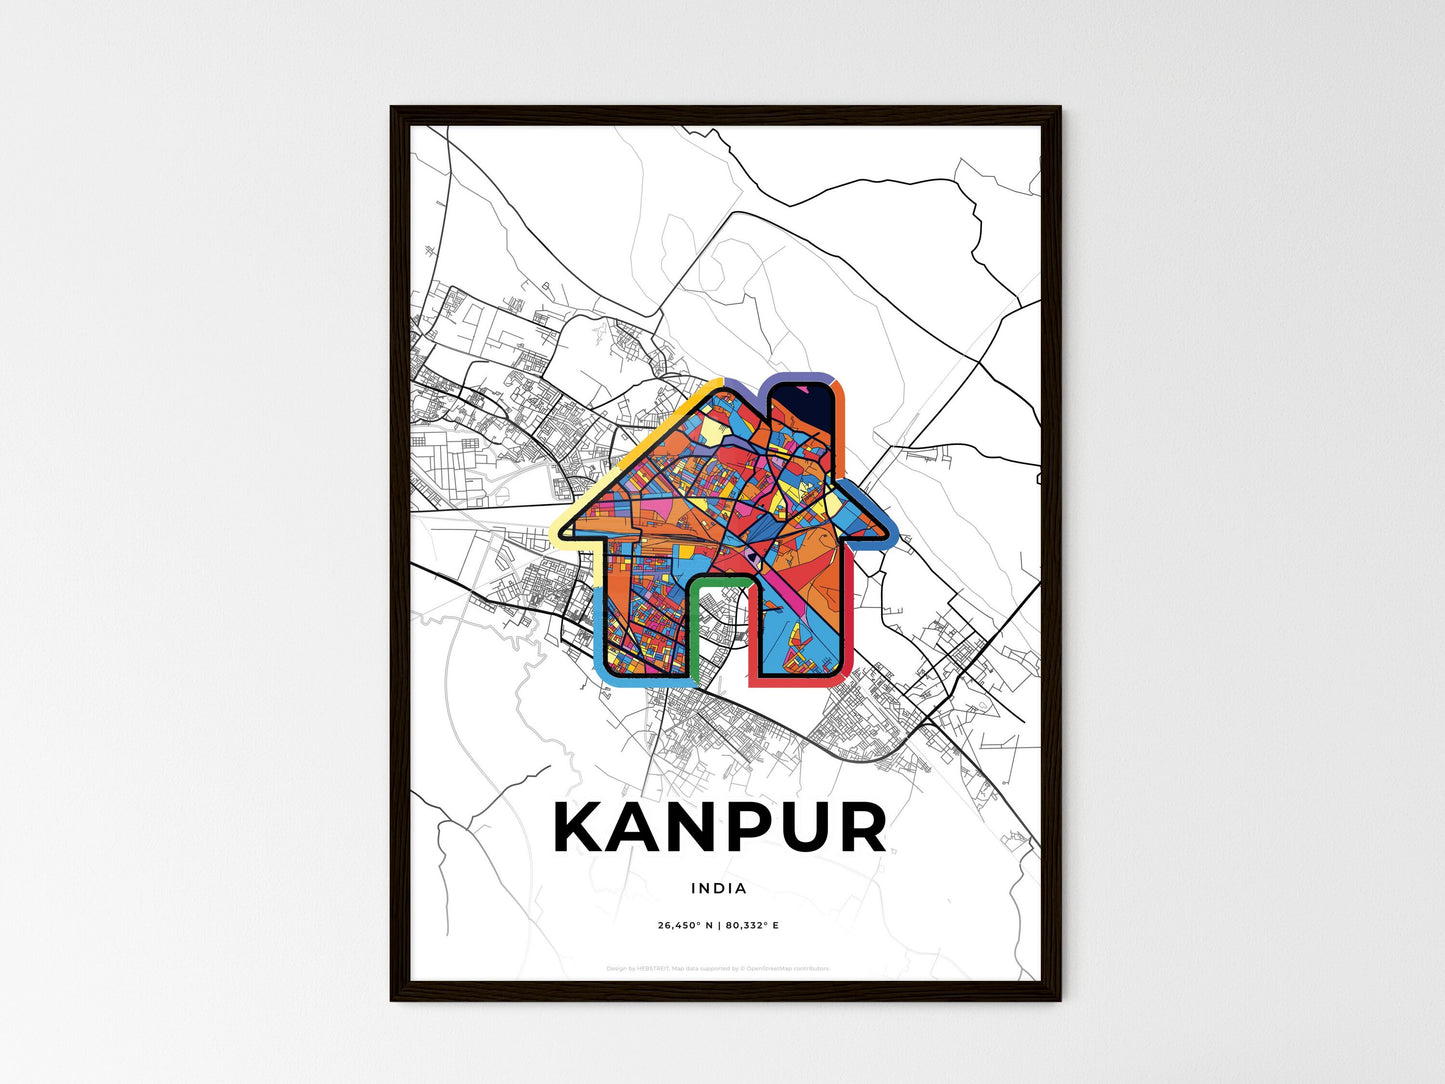 KANPUR INDIA minimal art map with a colorful icon. Where it all began, Couple map gift. 3